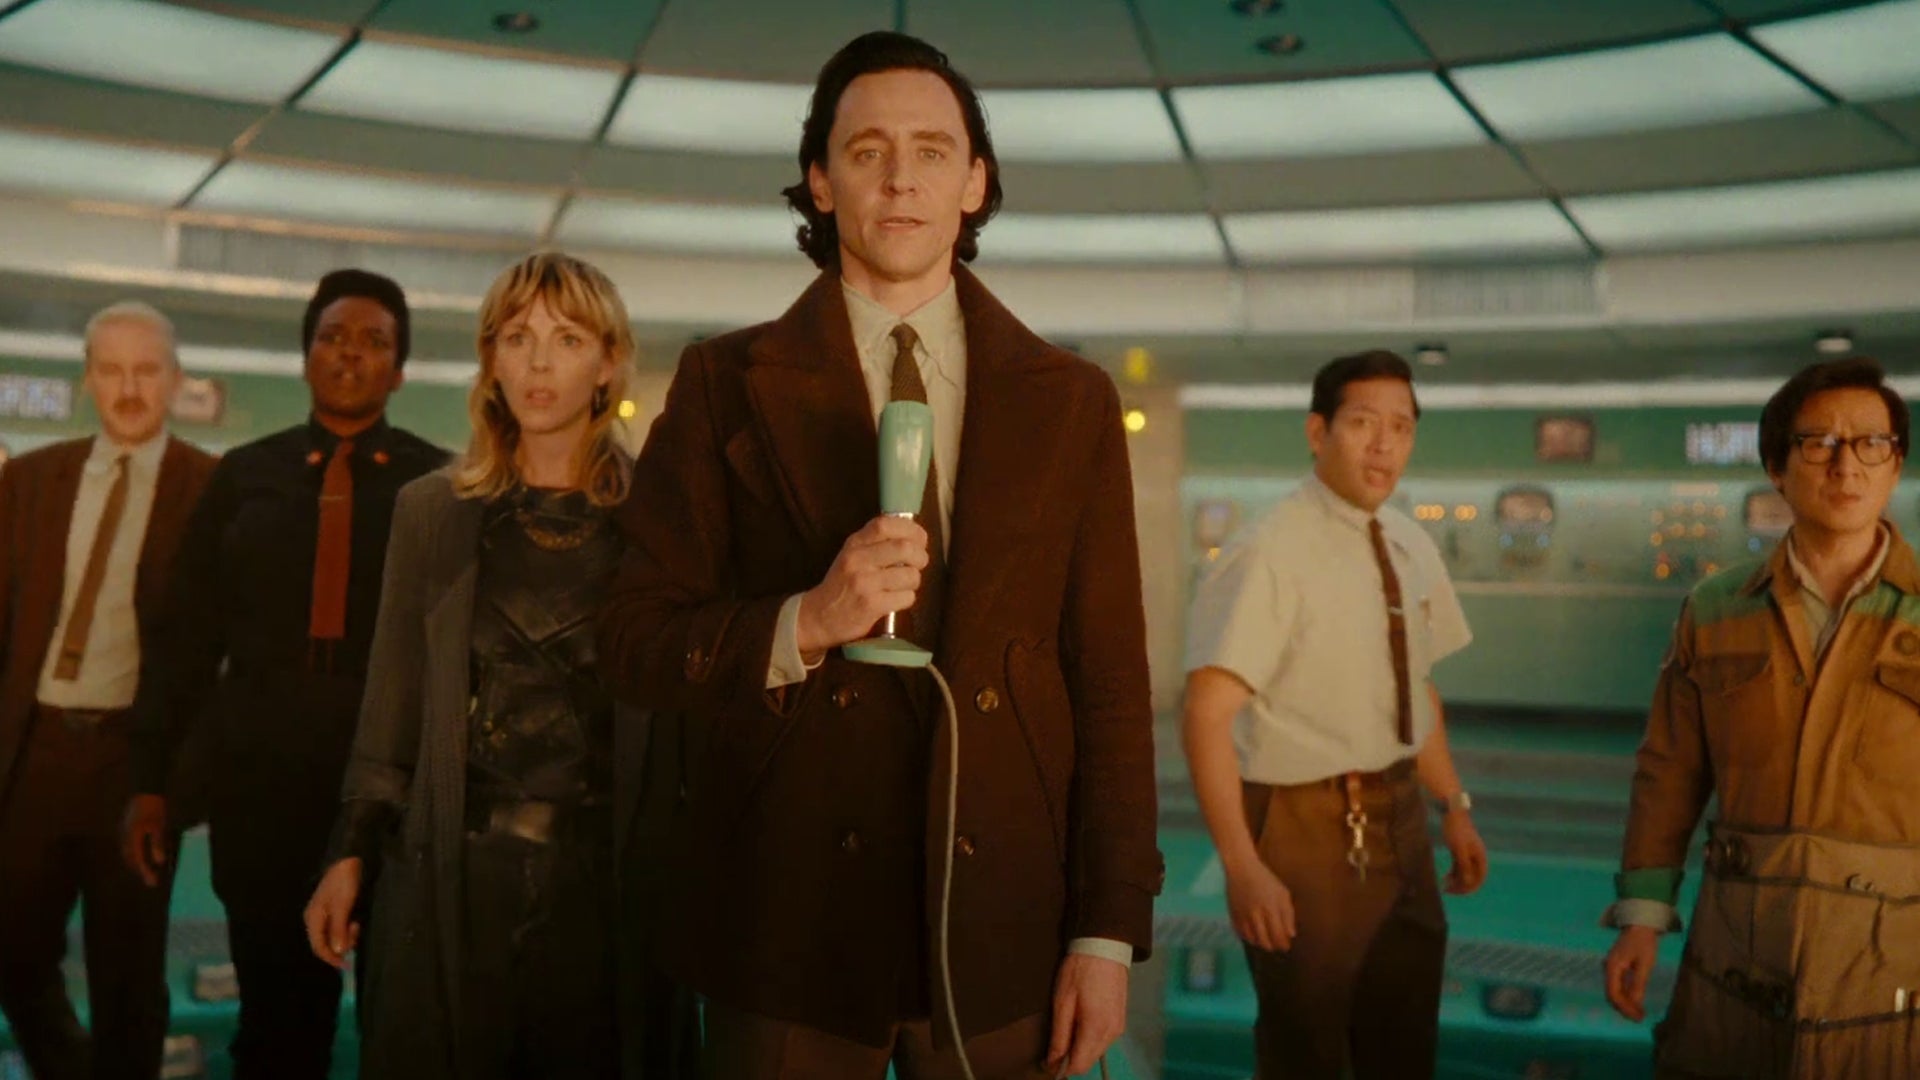 (Left to right) Owen Wilson, Wunmi Mosaku, Sophia Di Martino, Tom Hiddleston, Eugene Cordero, and Ke Huy Quan stand together in the 2nd season finale of Loki, which aired on Thursday, Nov. 9th.